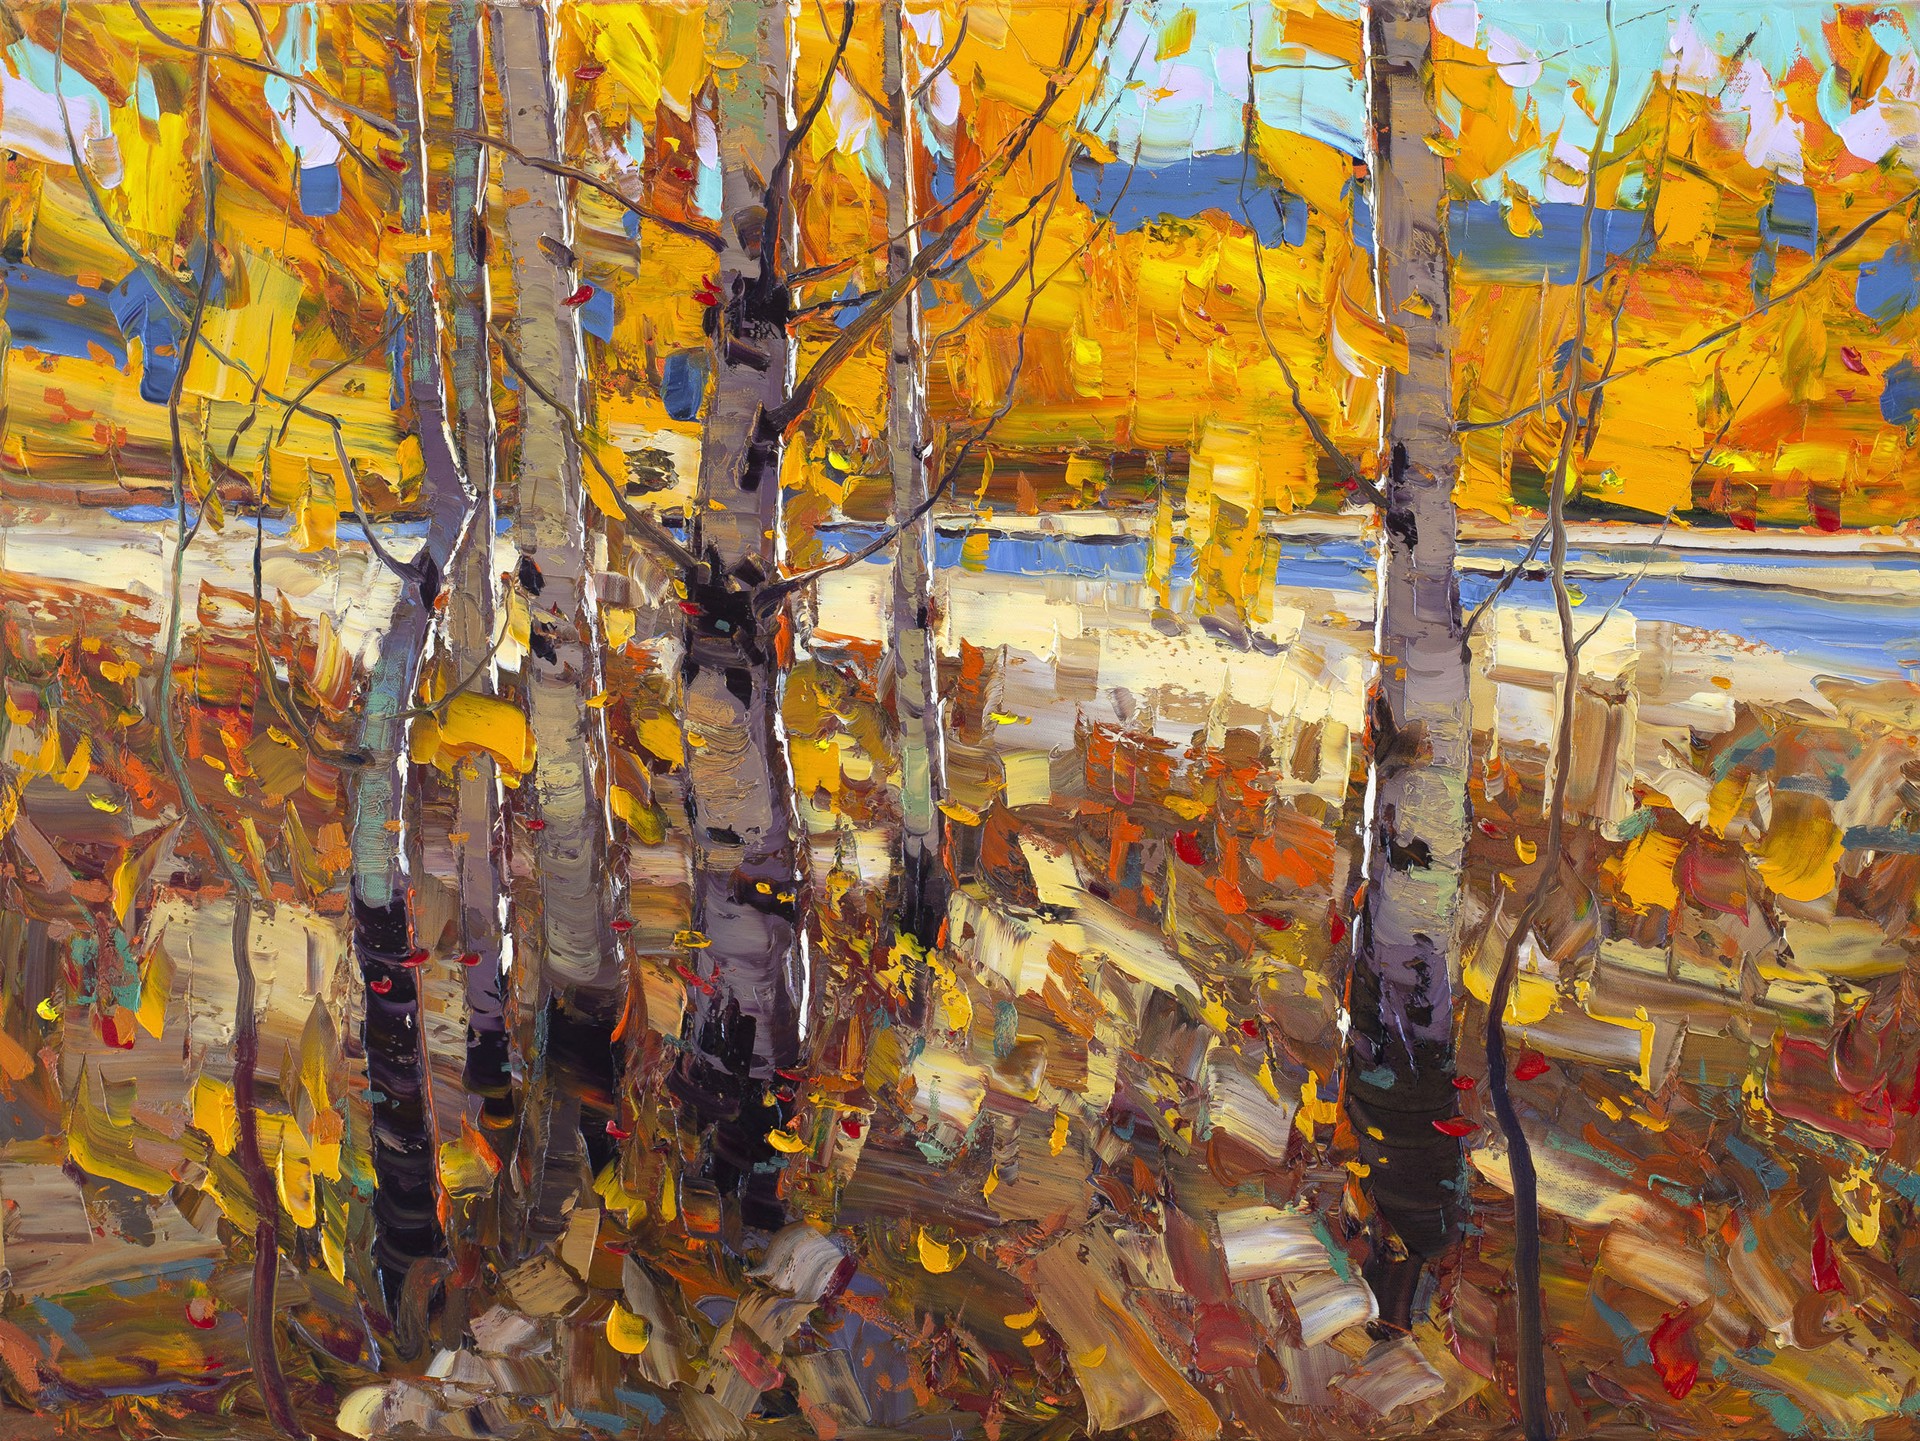 Original Landscape Painting Featuring Aspen Trees With Fall Foliage And Blue Mountain In The Background